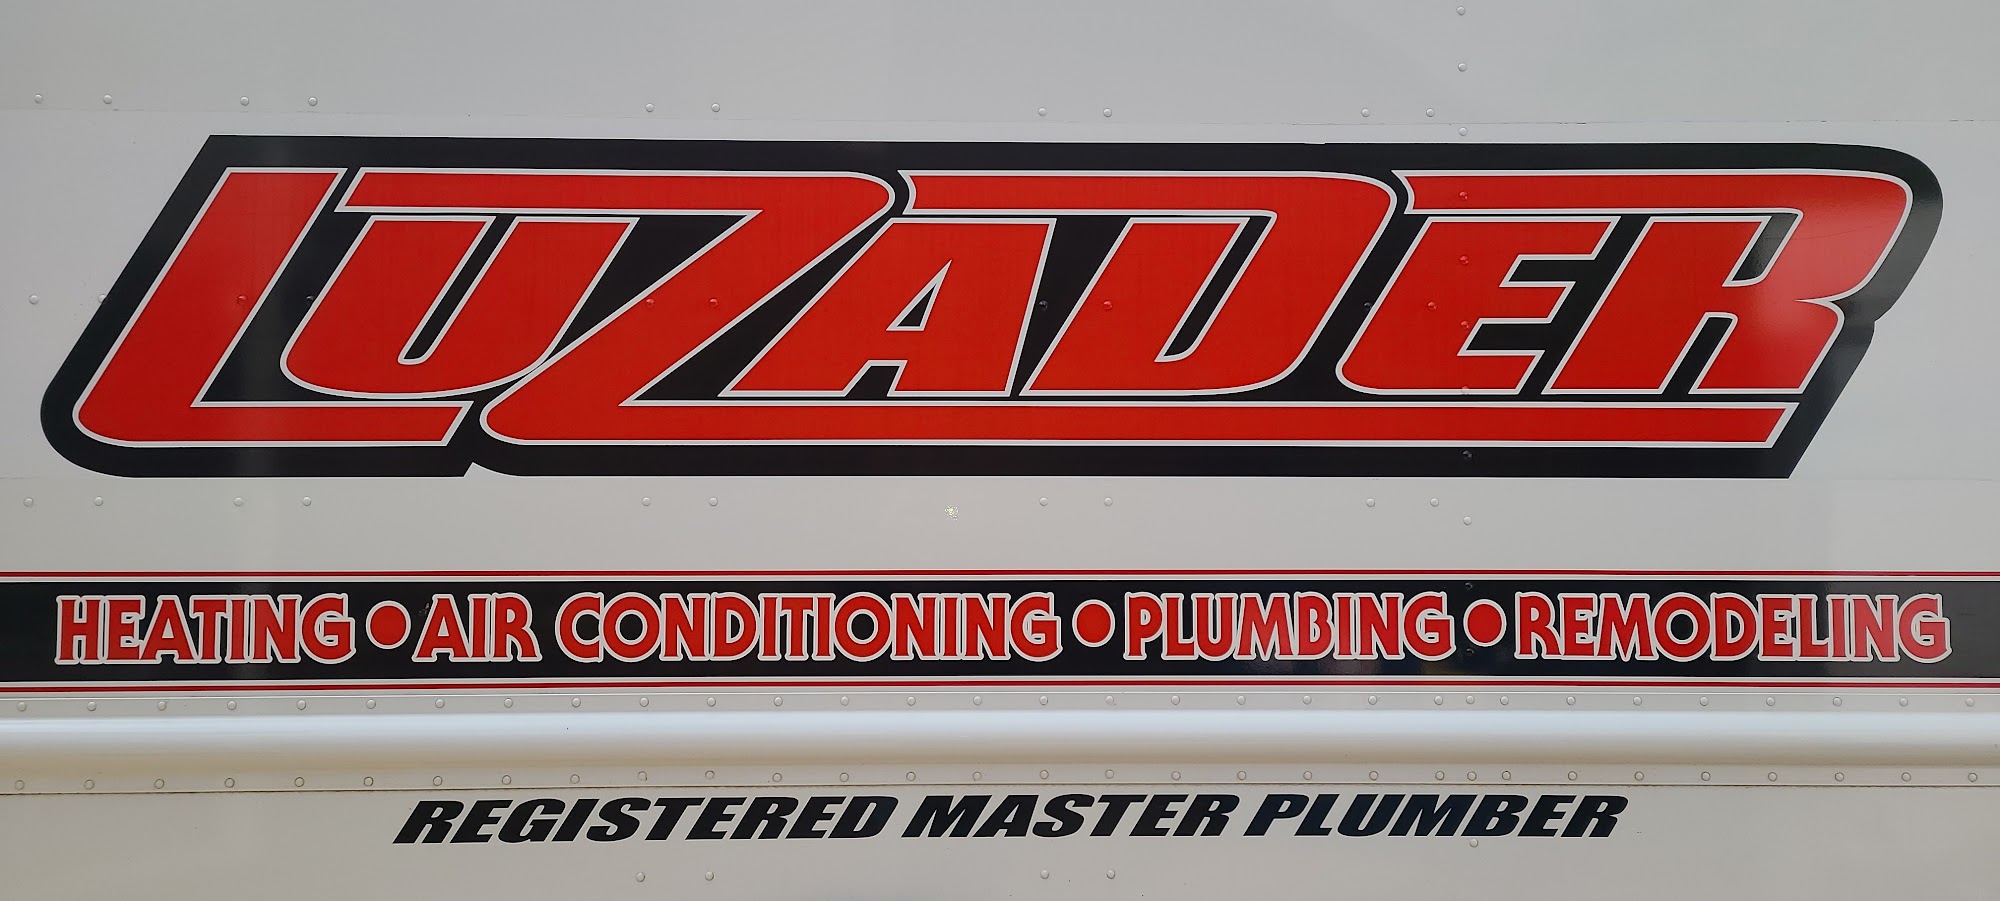 Luzader Heating, Air Conditioning and Plumbing 2822 Italy Rd, Export Pennsylvania 15632